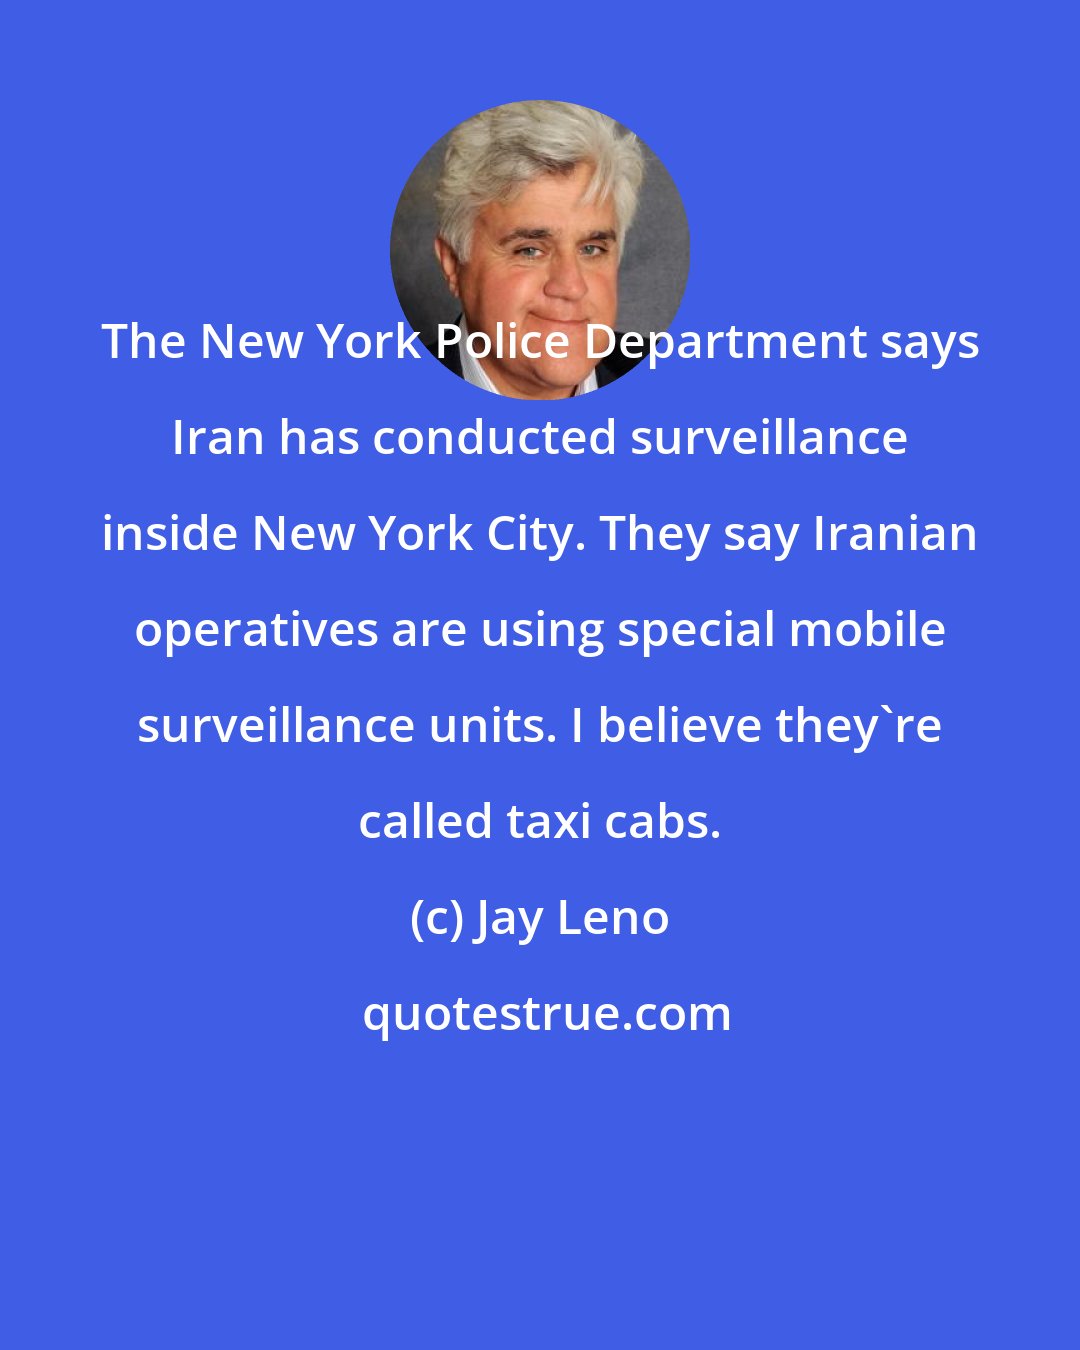 Jay Leno: The New York Police Department says Iran has conducted surveillance inside New York City. They say Iranian operatives are using special mobile surveillance units. I believe they're called taxi cabs.